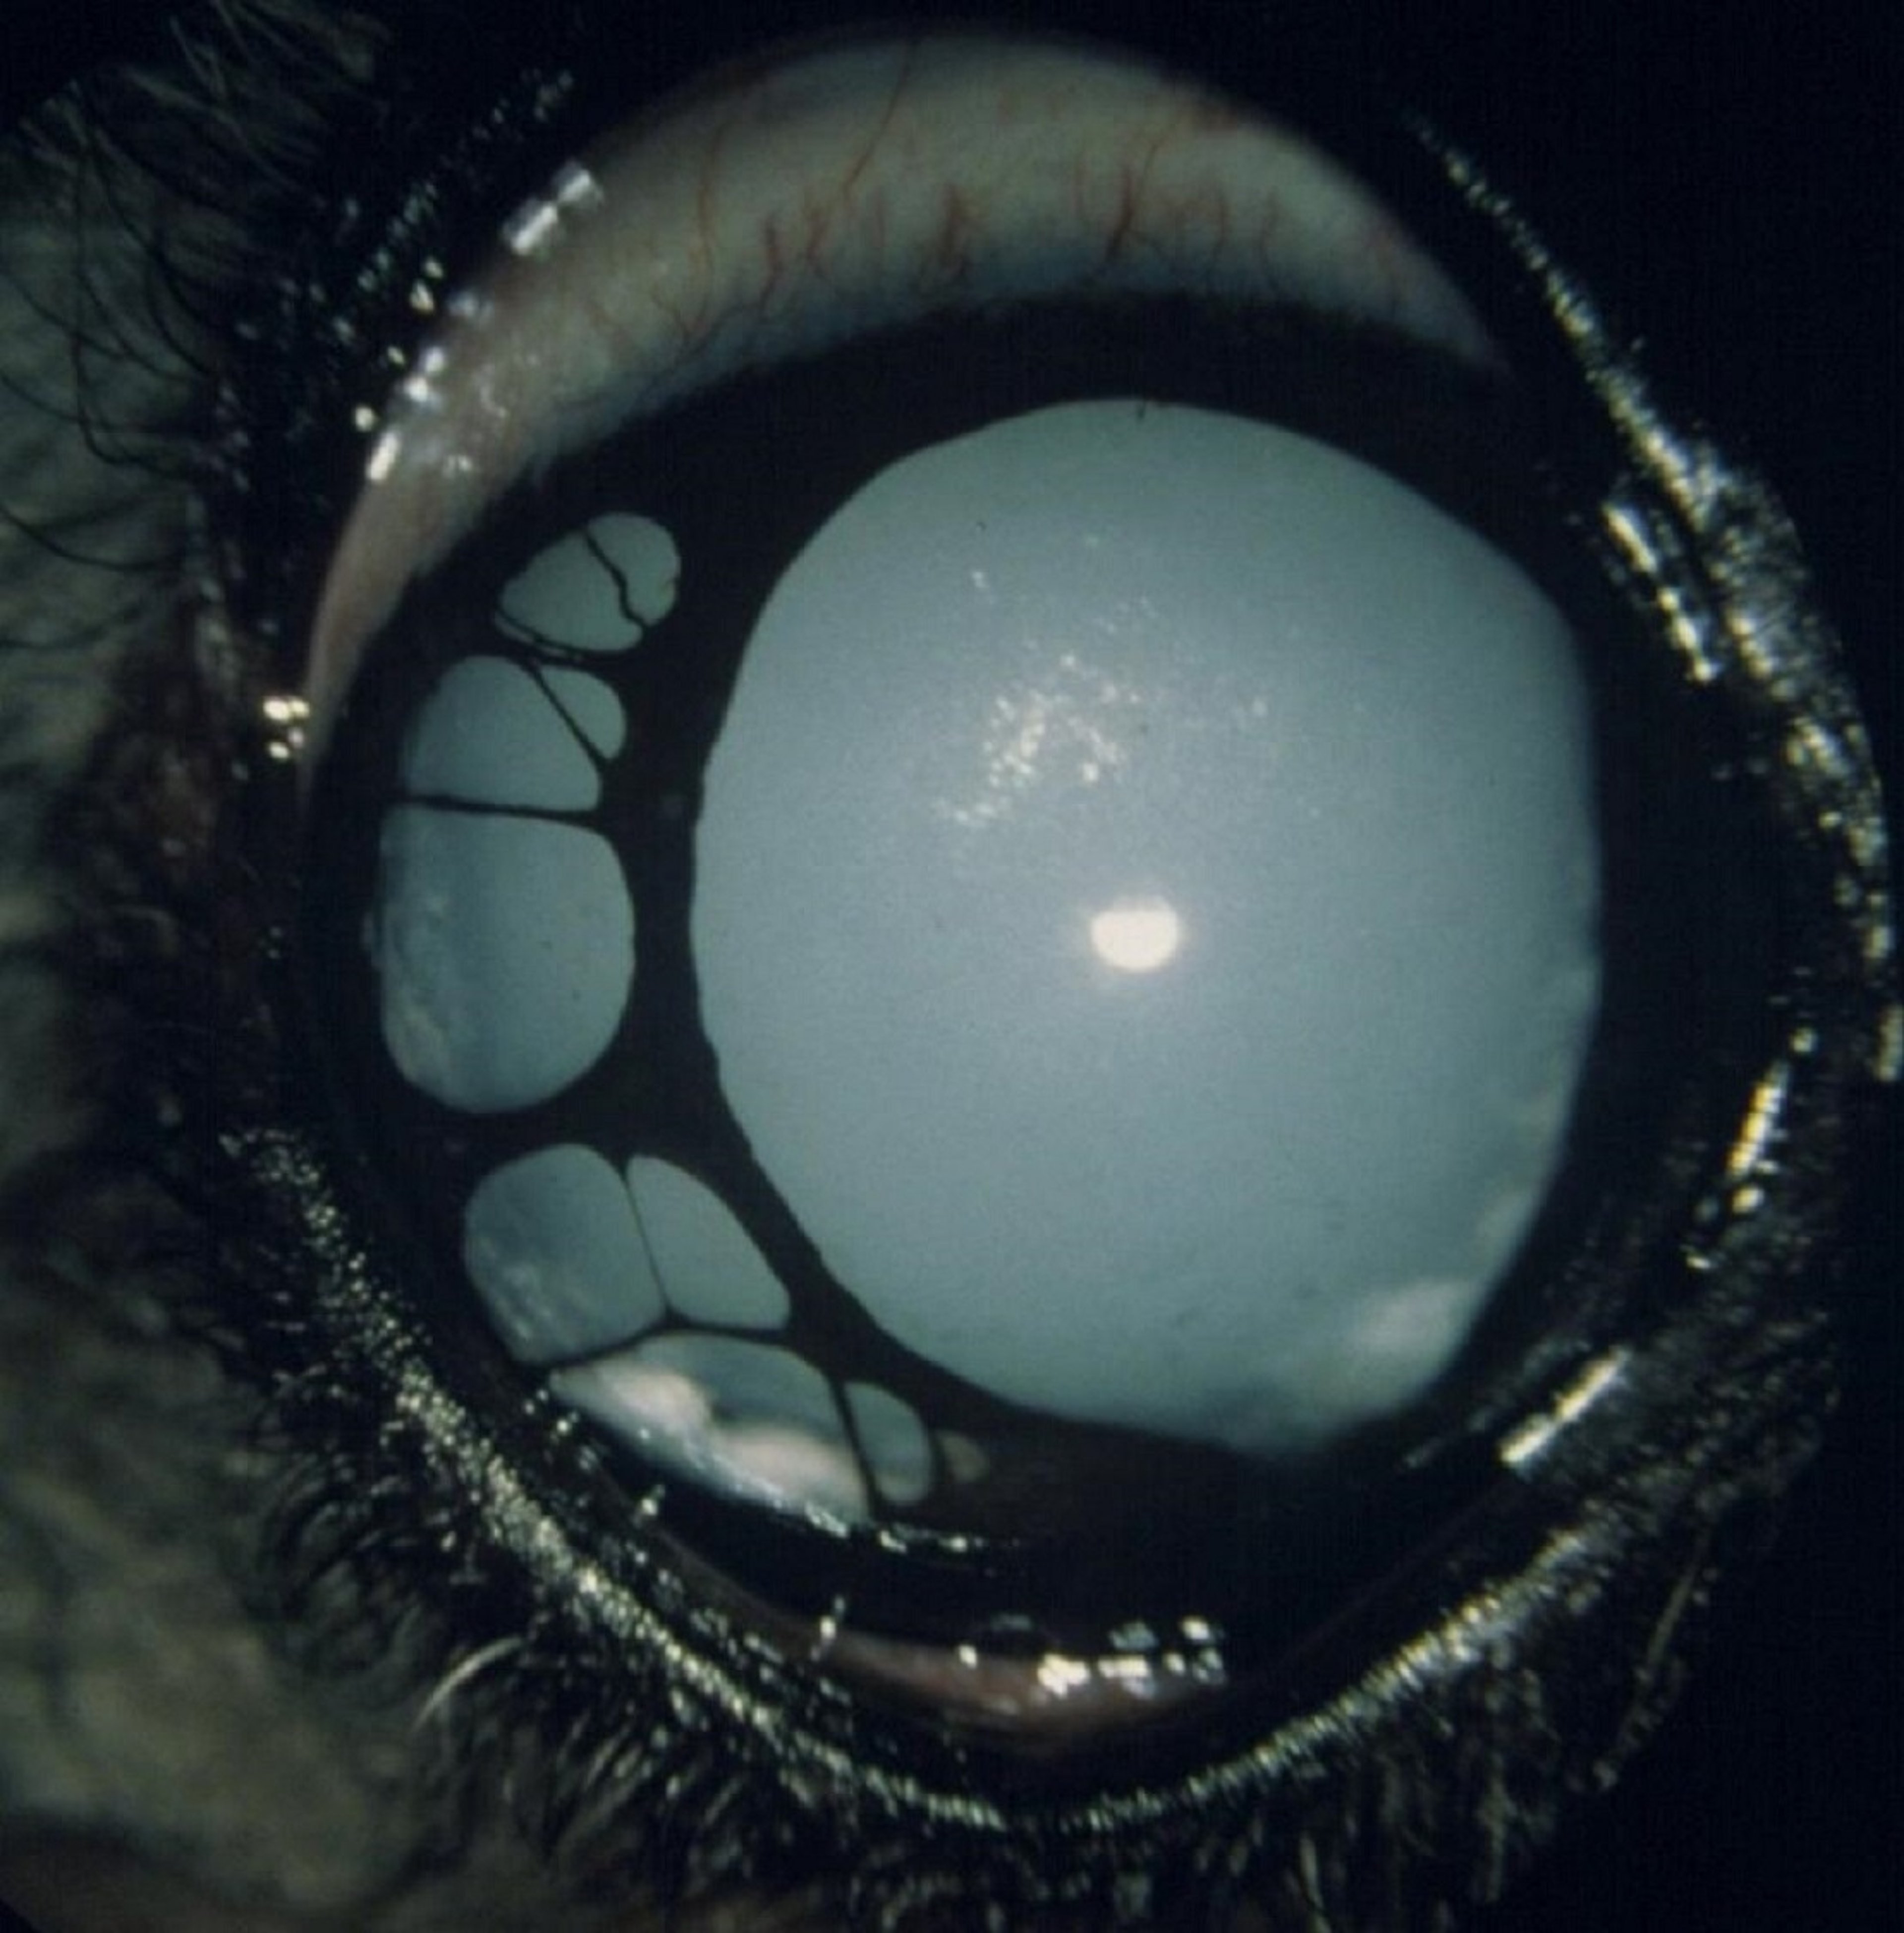 Advanced iris atrophy with complete cataract formation, dog